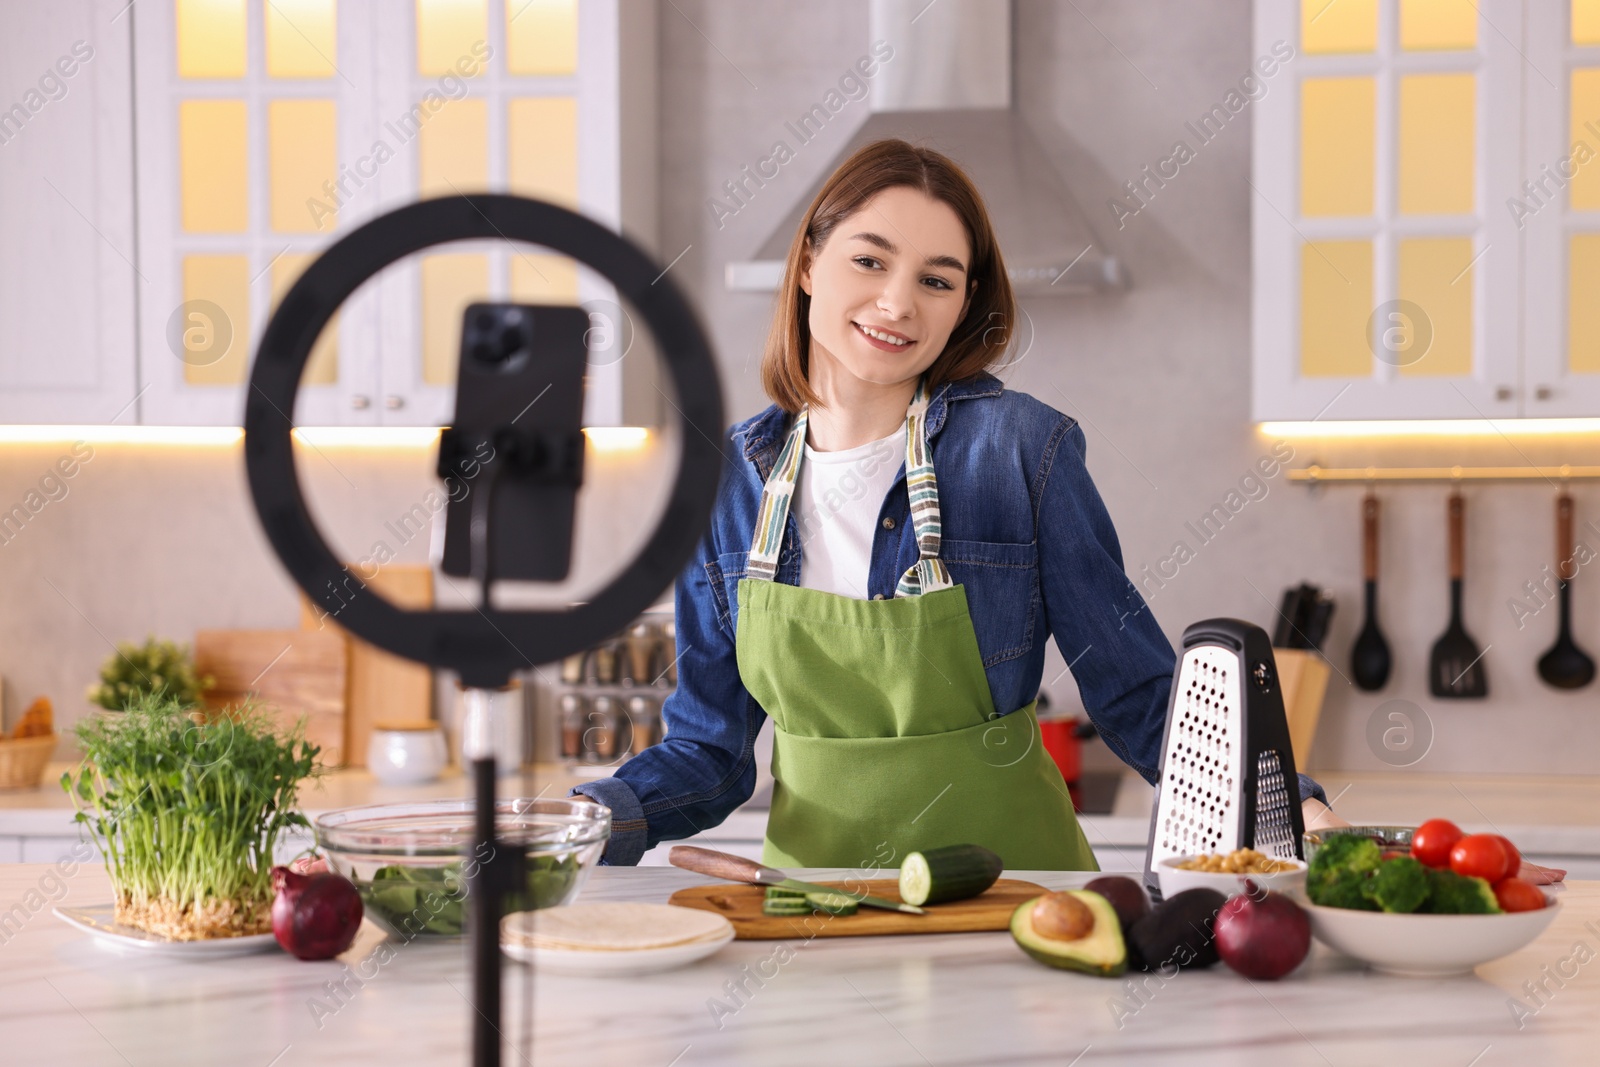 Photo of Food blogger cooking while recording video with smartphone and ring lamp in kitchen